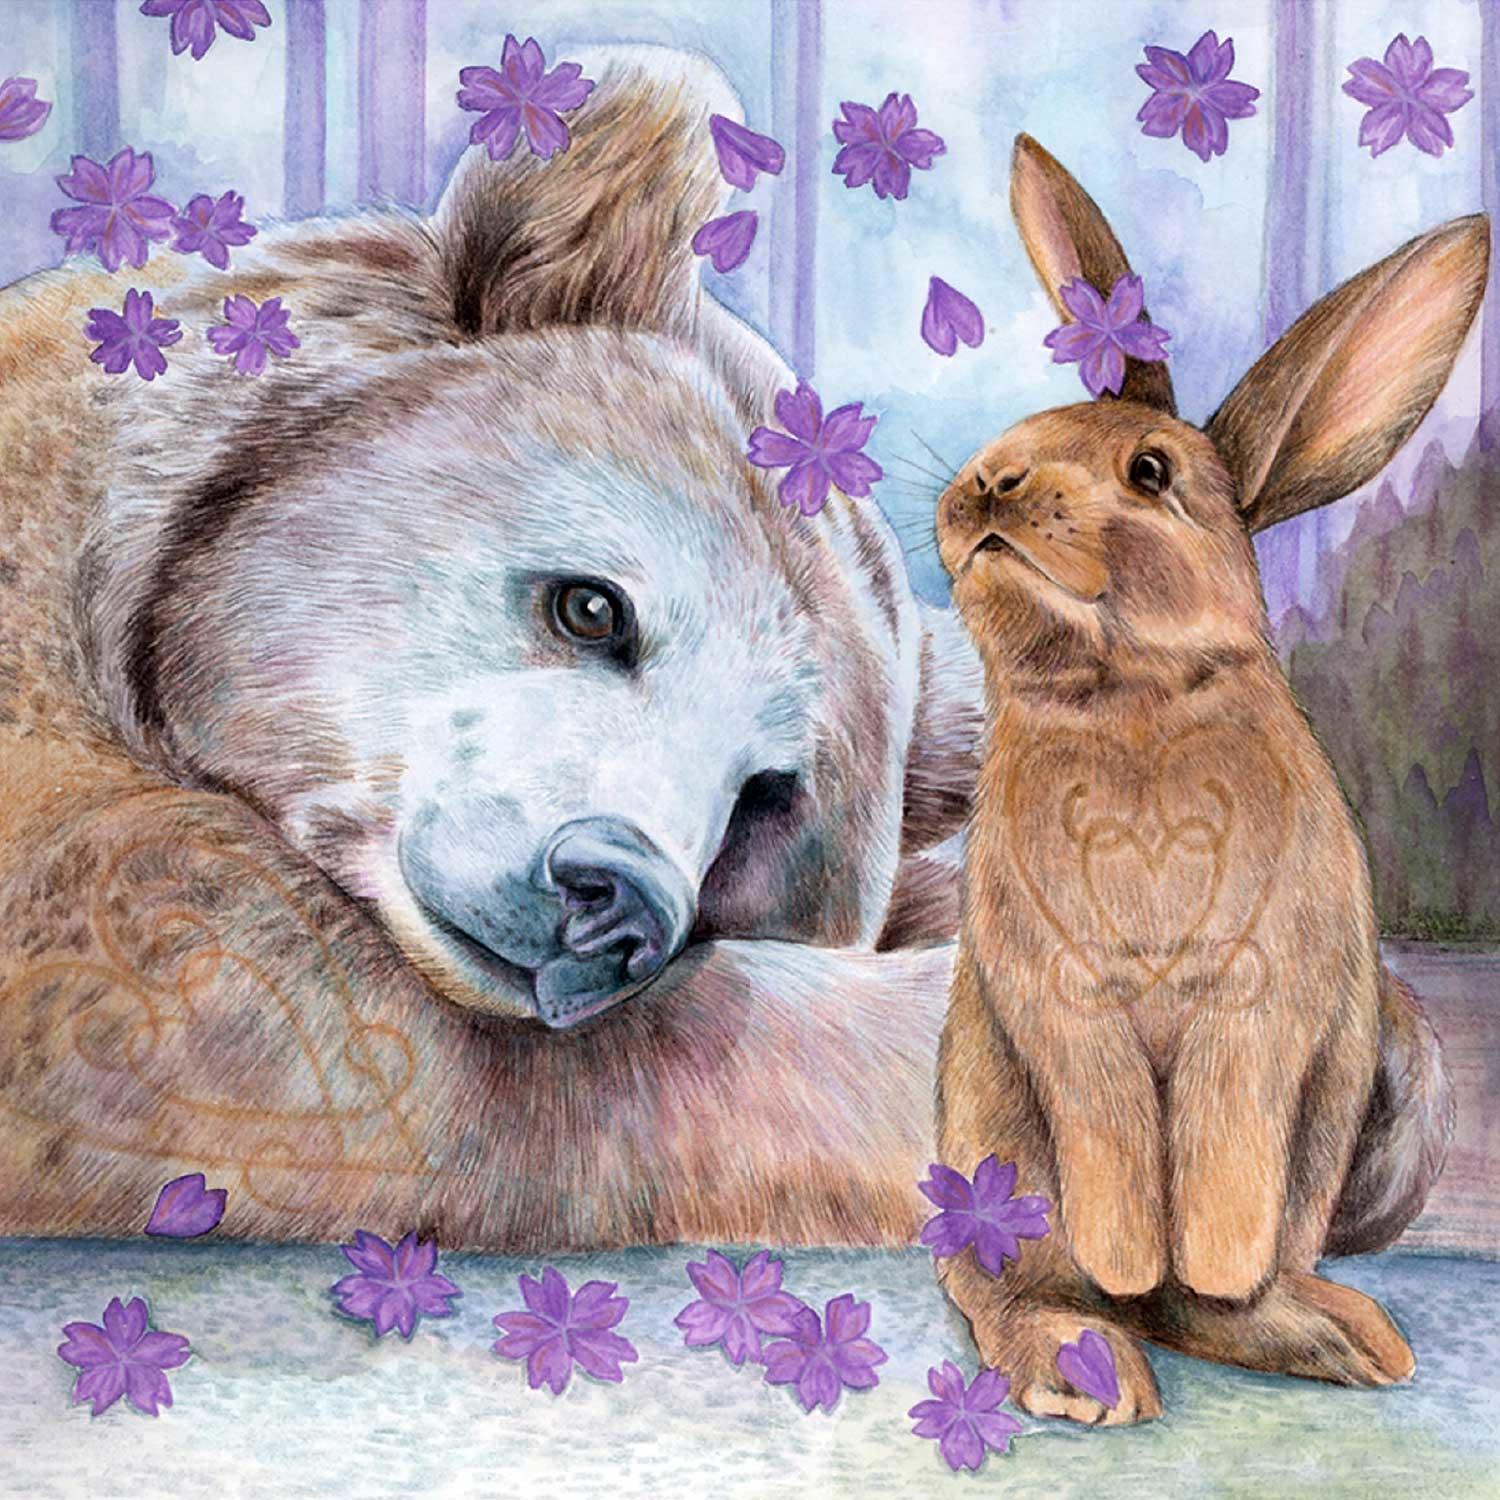 Bear and Bunny by Marjory Tait